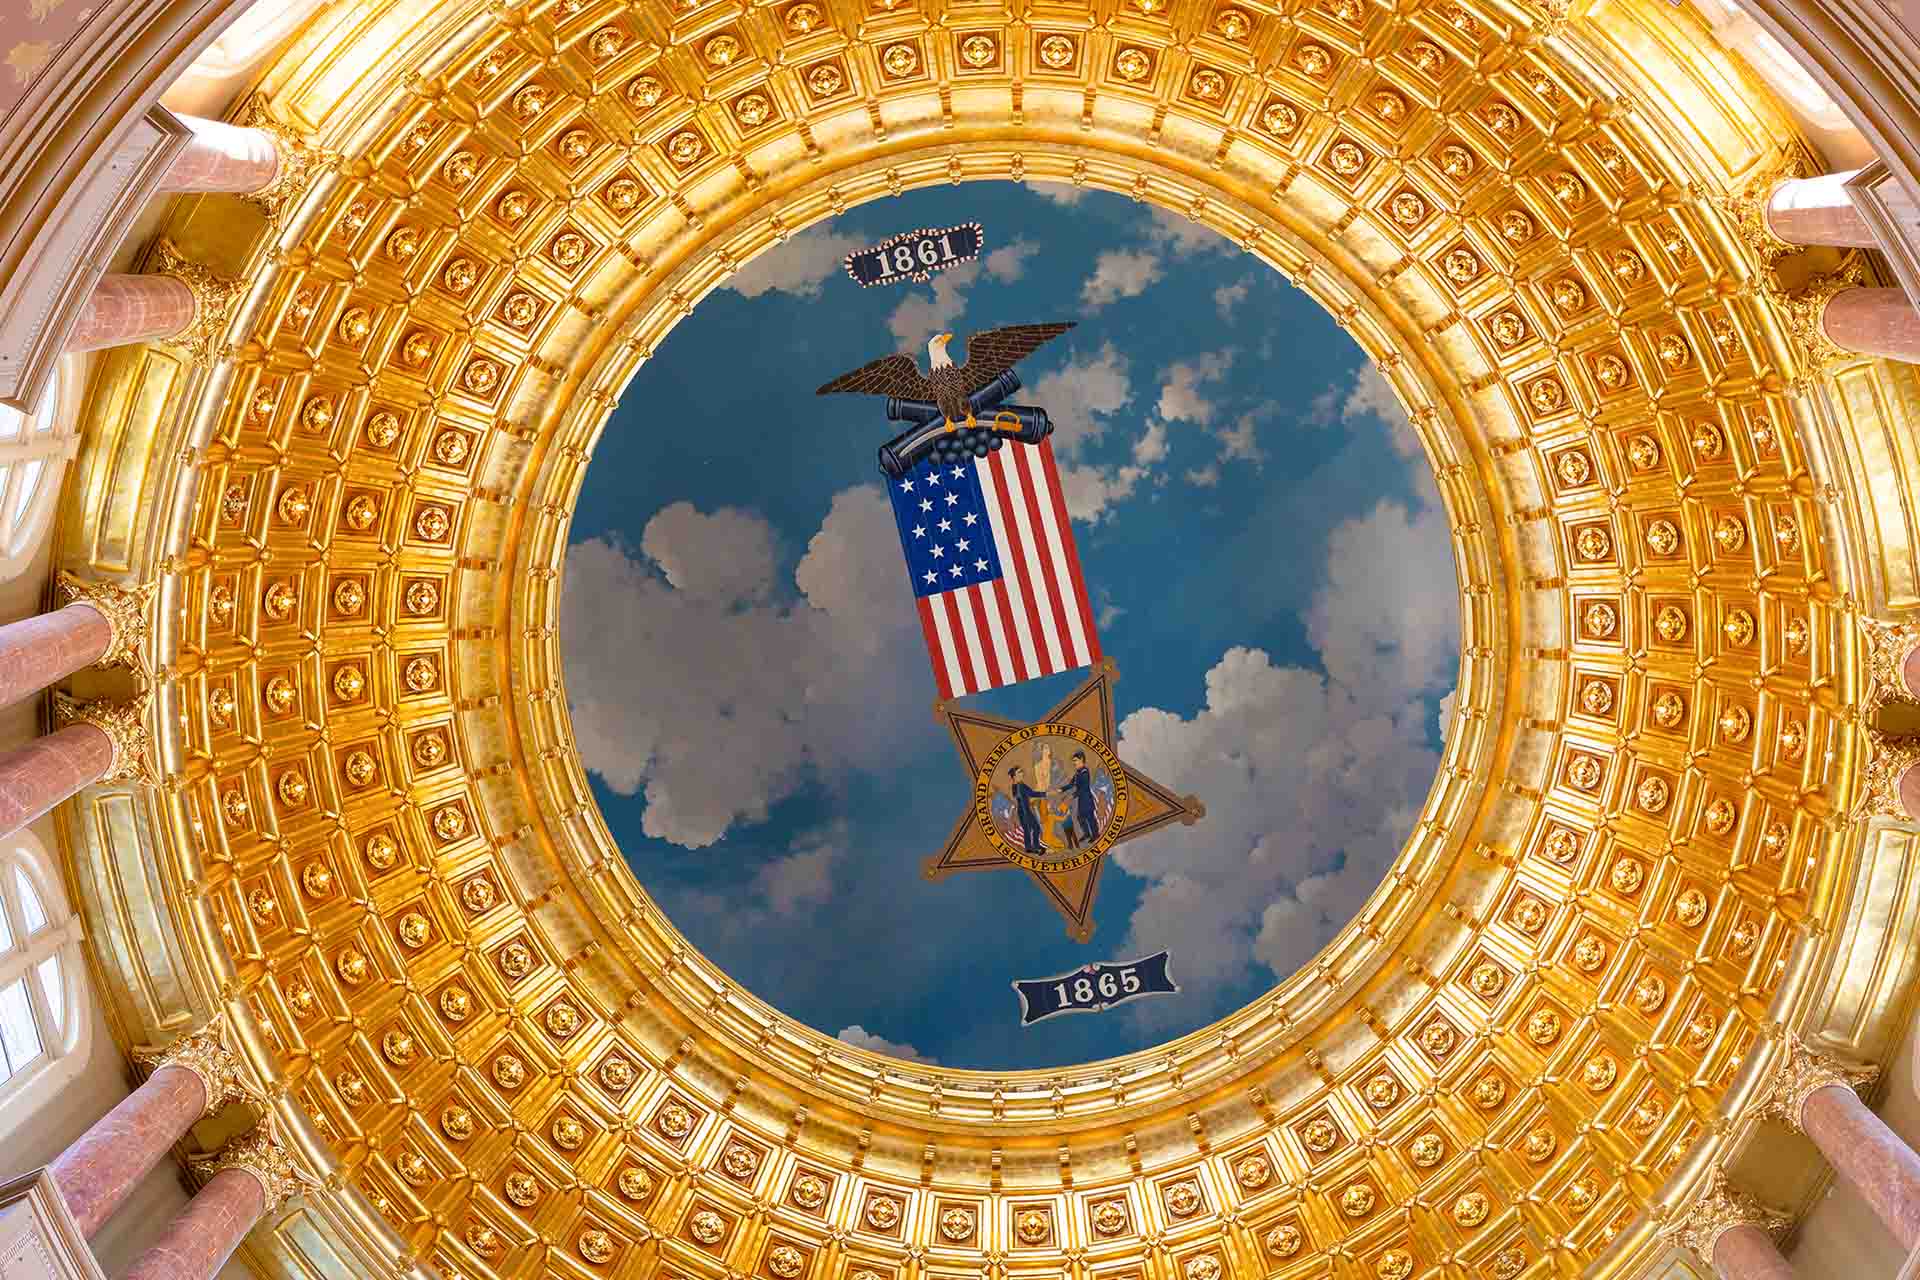 Ceiling of Iowa capitol with painting